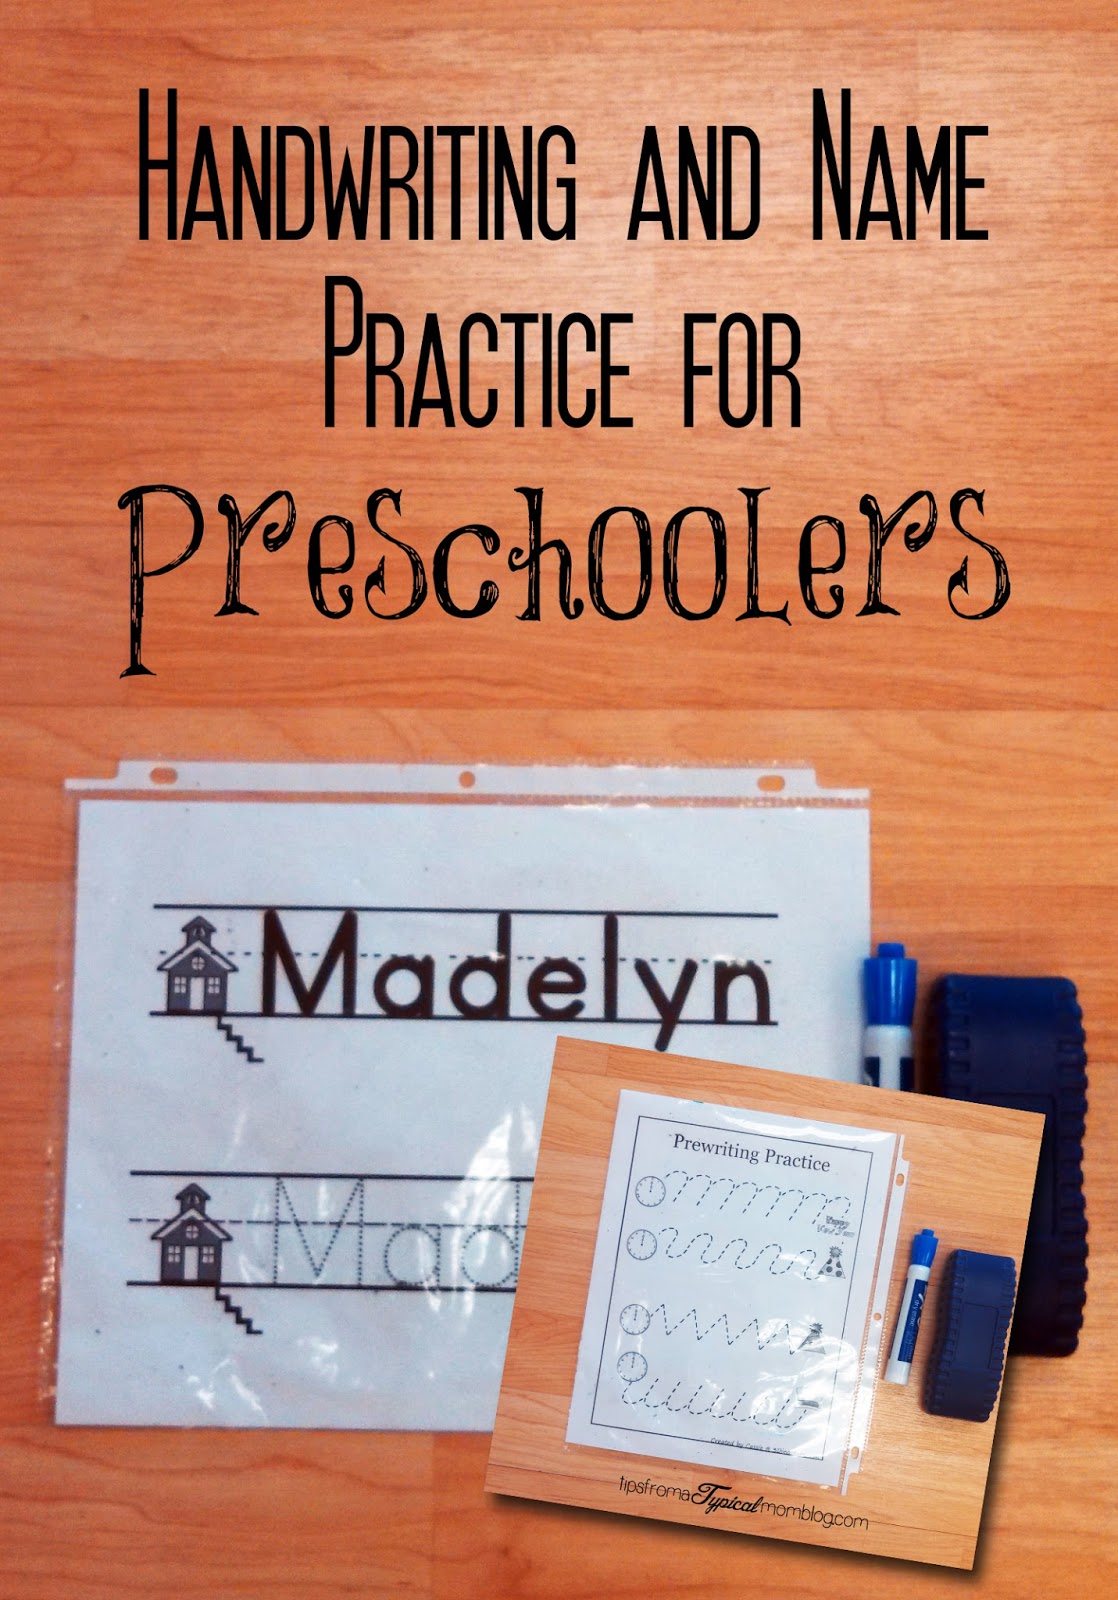 Name and Handwriting Practice Ideas for Preschoolers - Tips from a